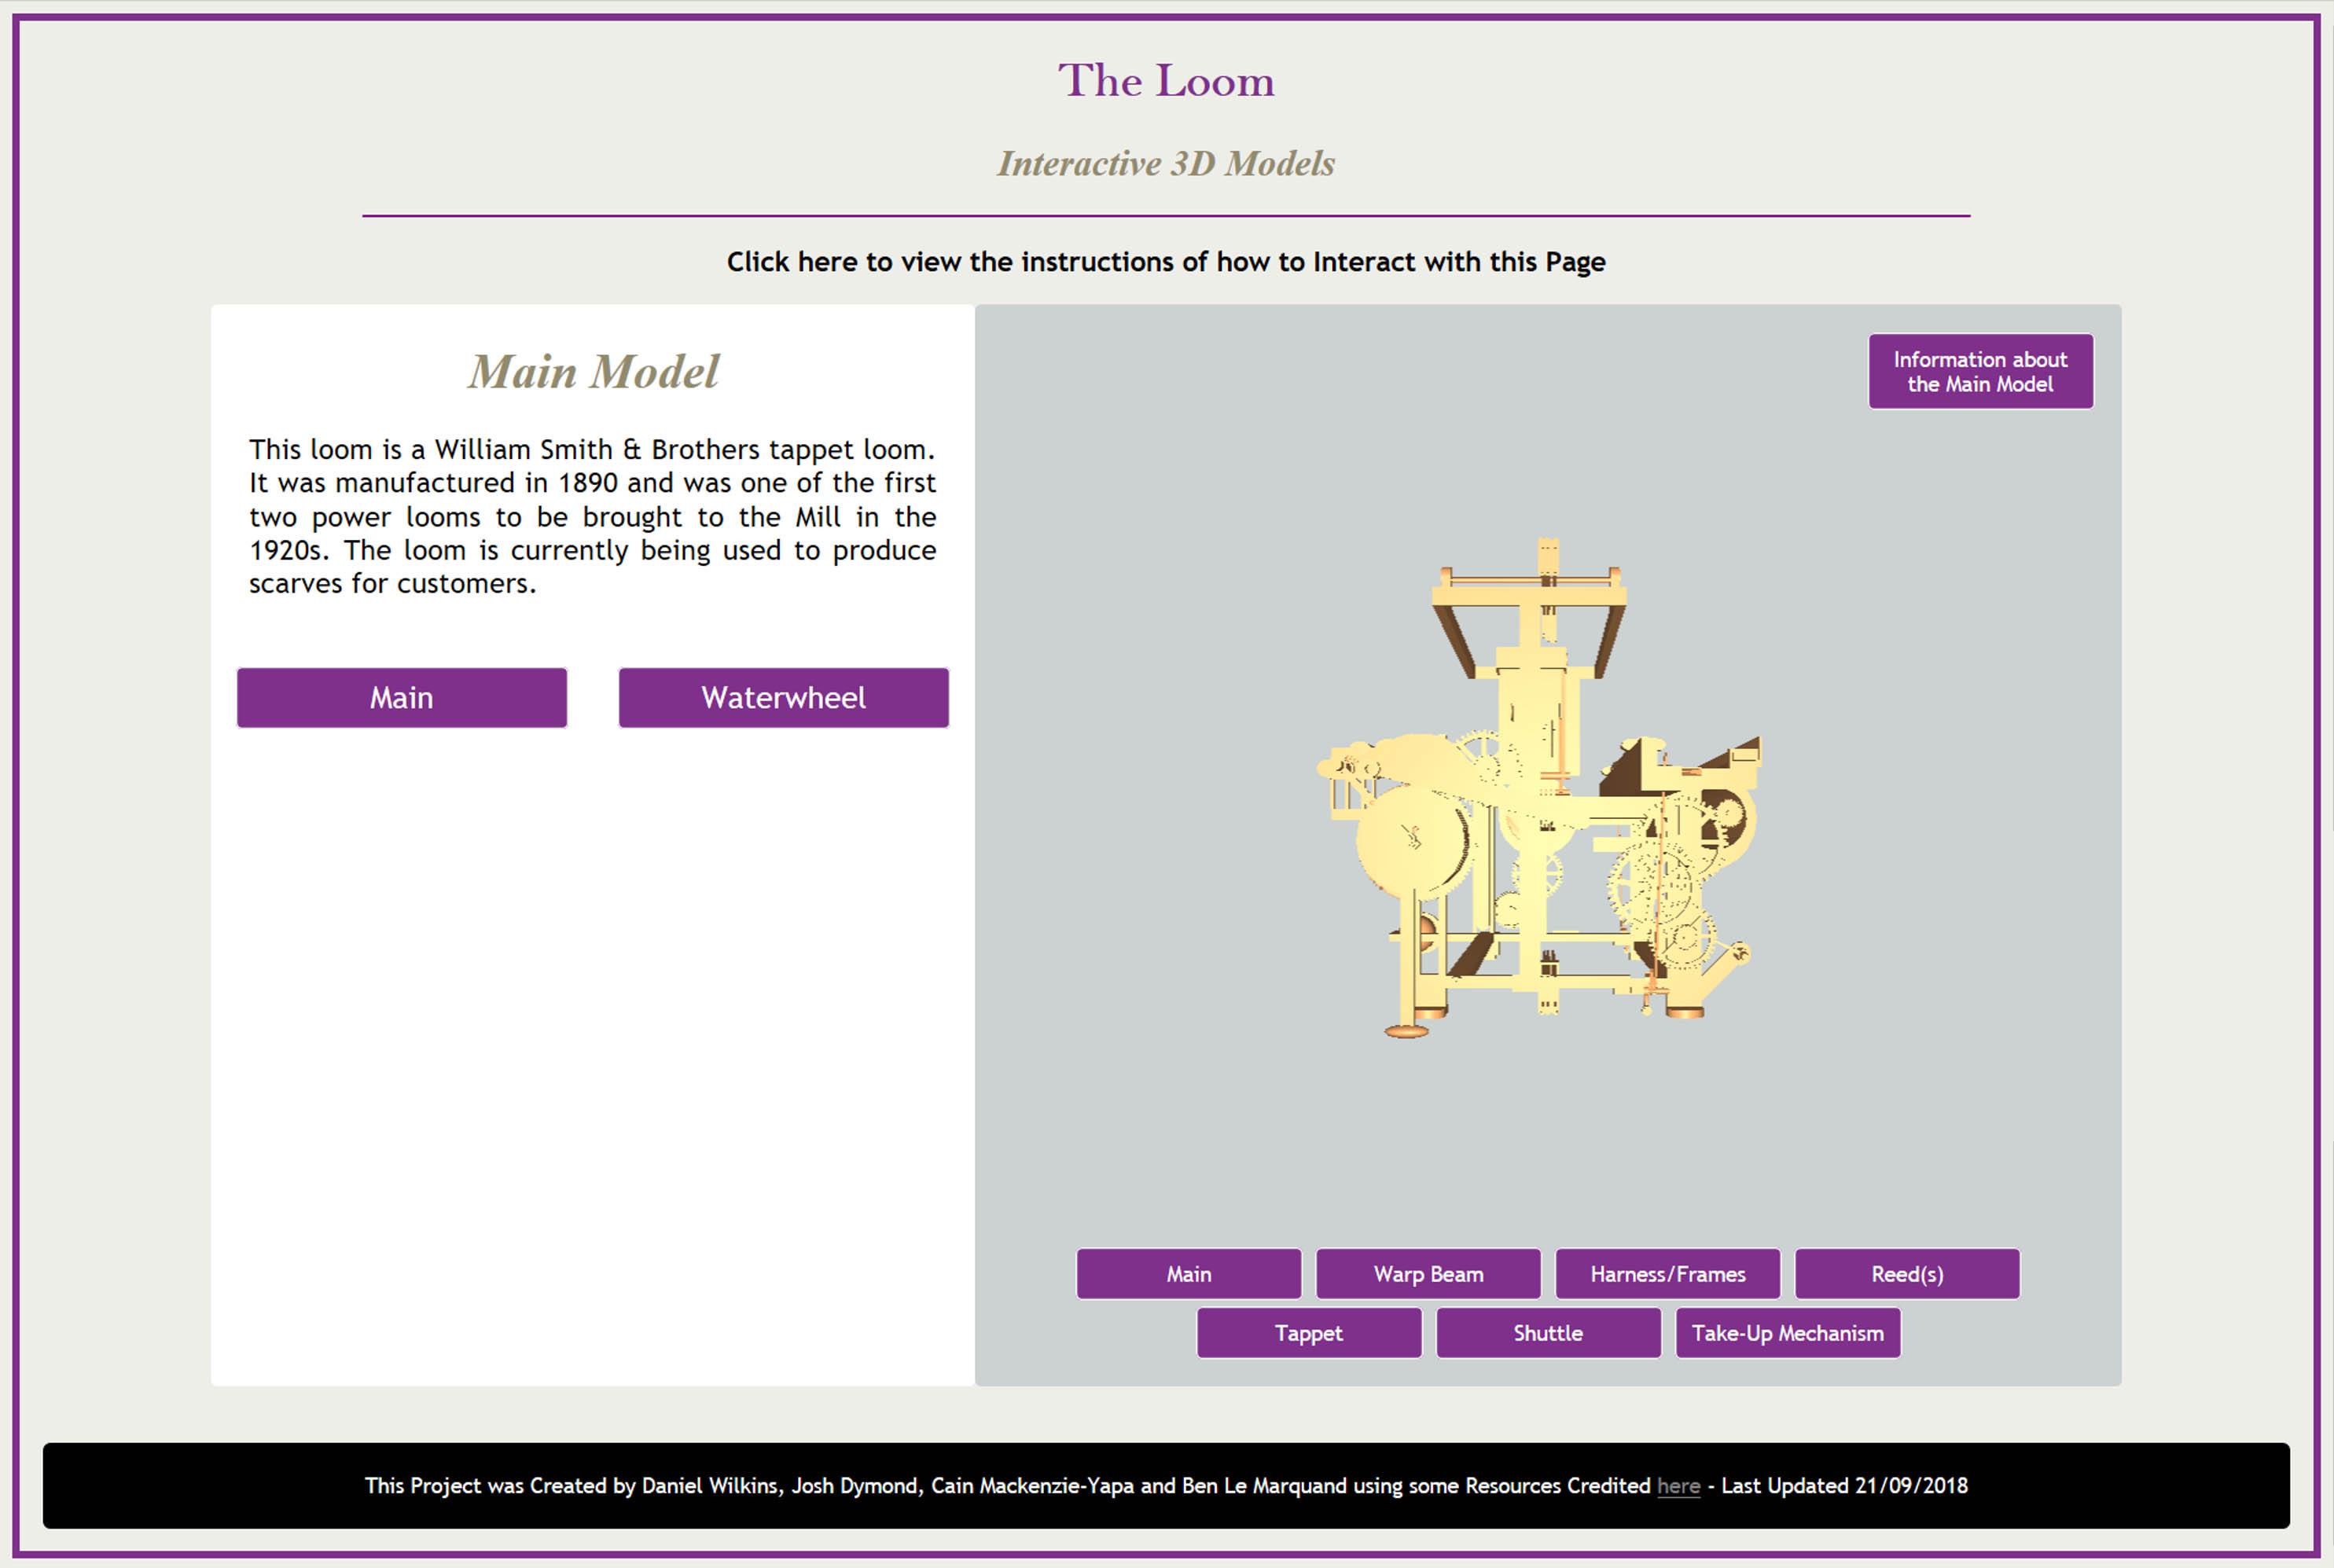 The Final Appearance of the Loom Page